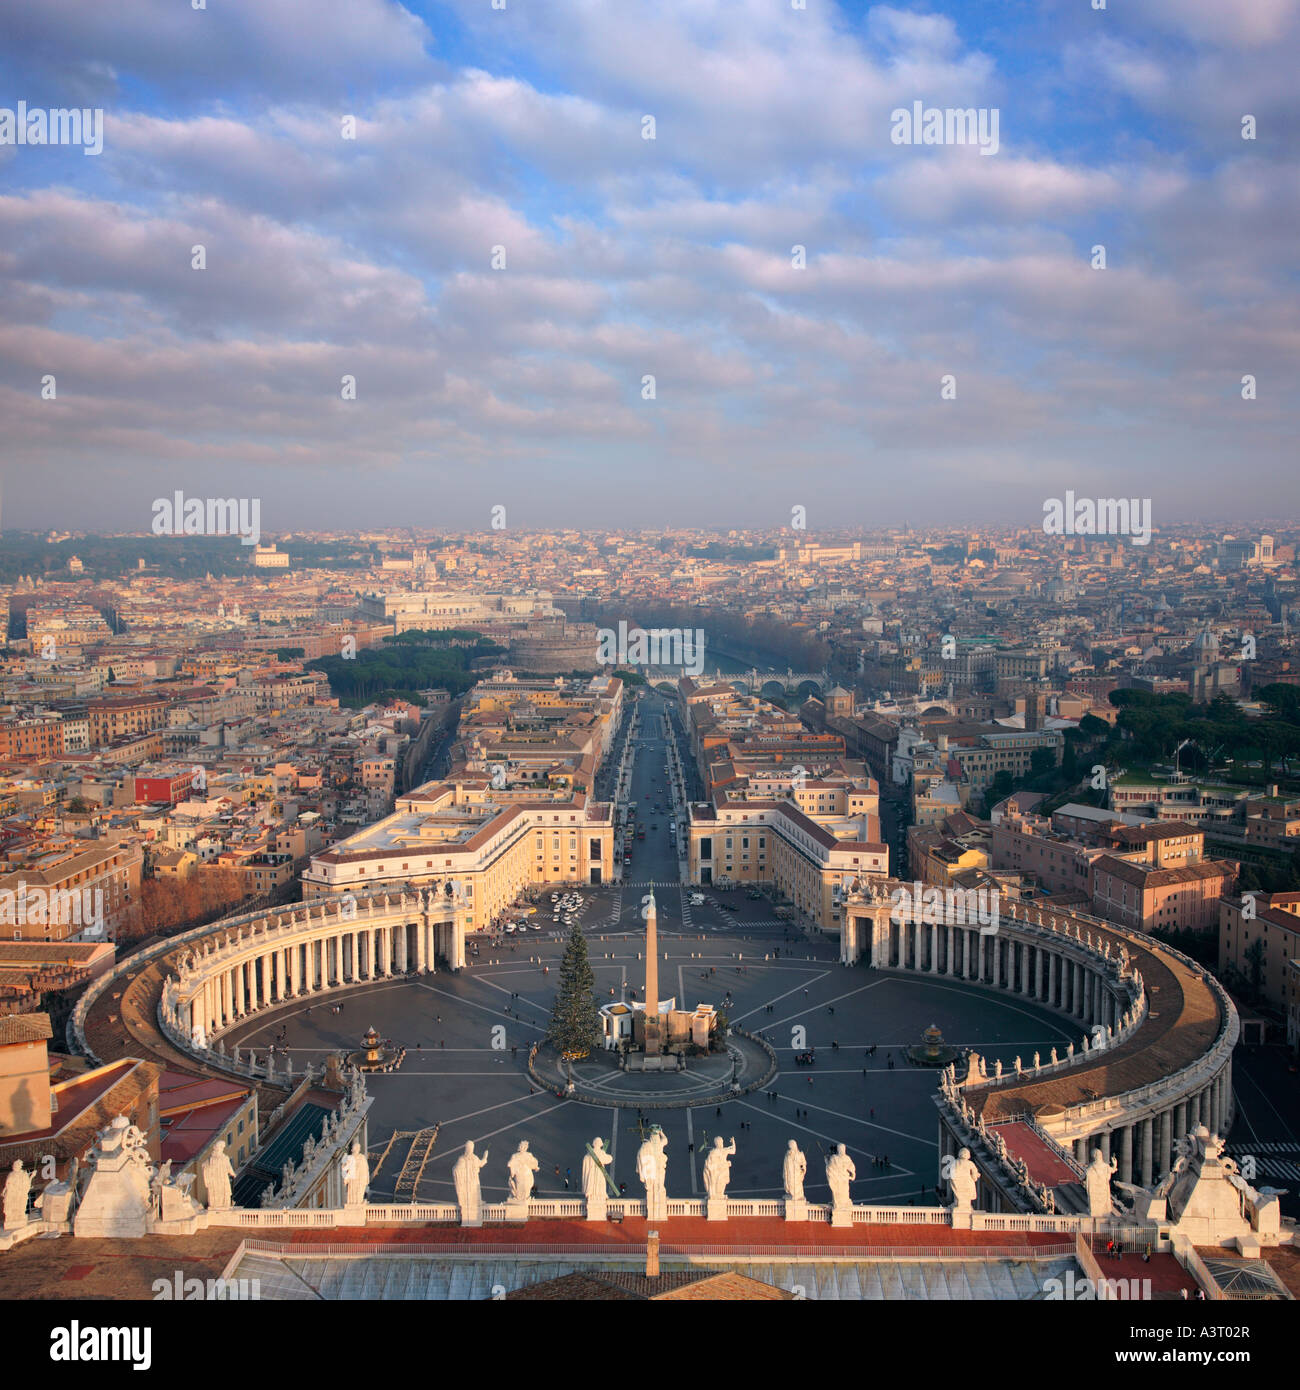 Saint Peter's Square from the Cupola of St Peter's Basilica Vatican City Rome Italy Stock Photo